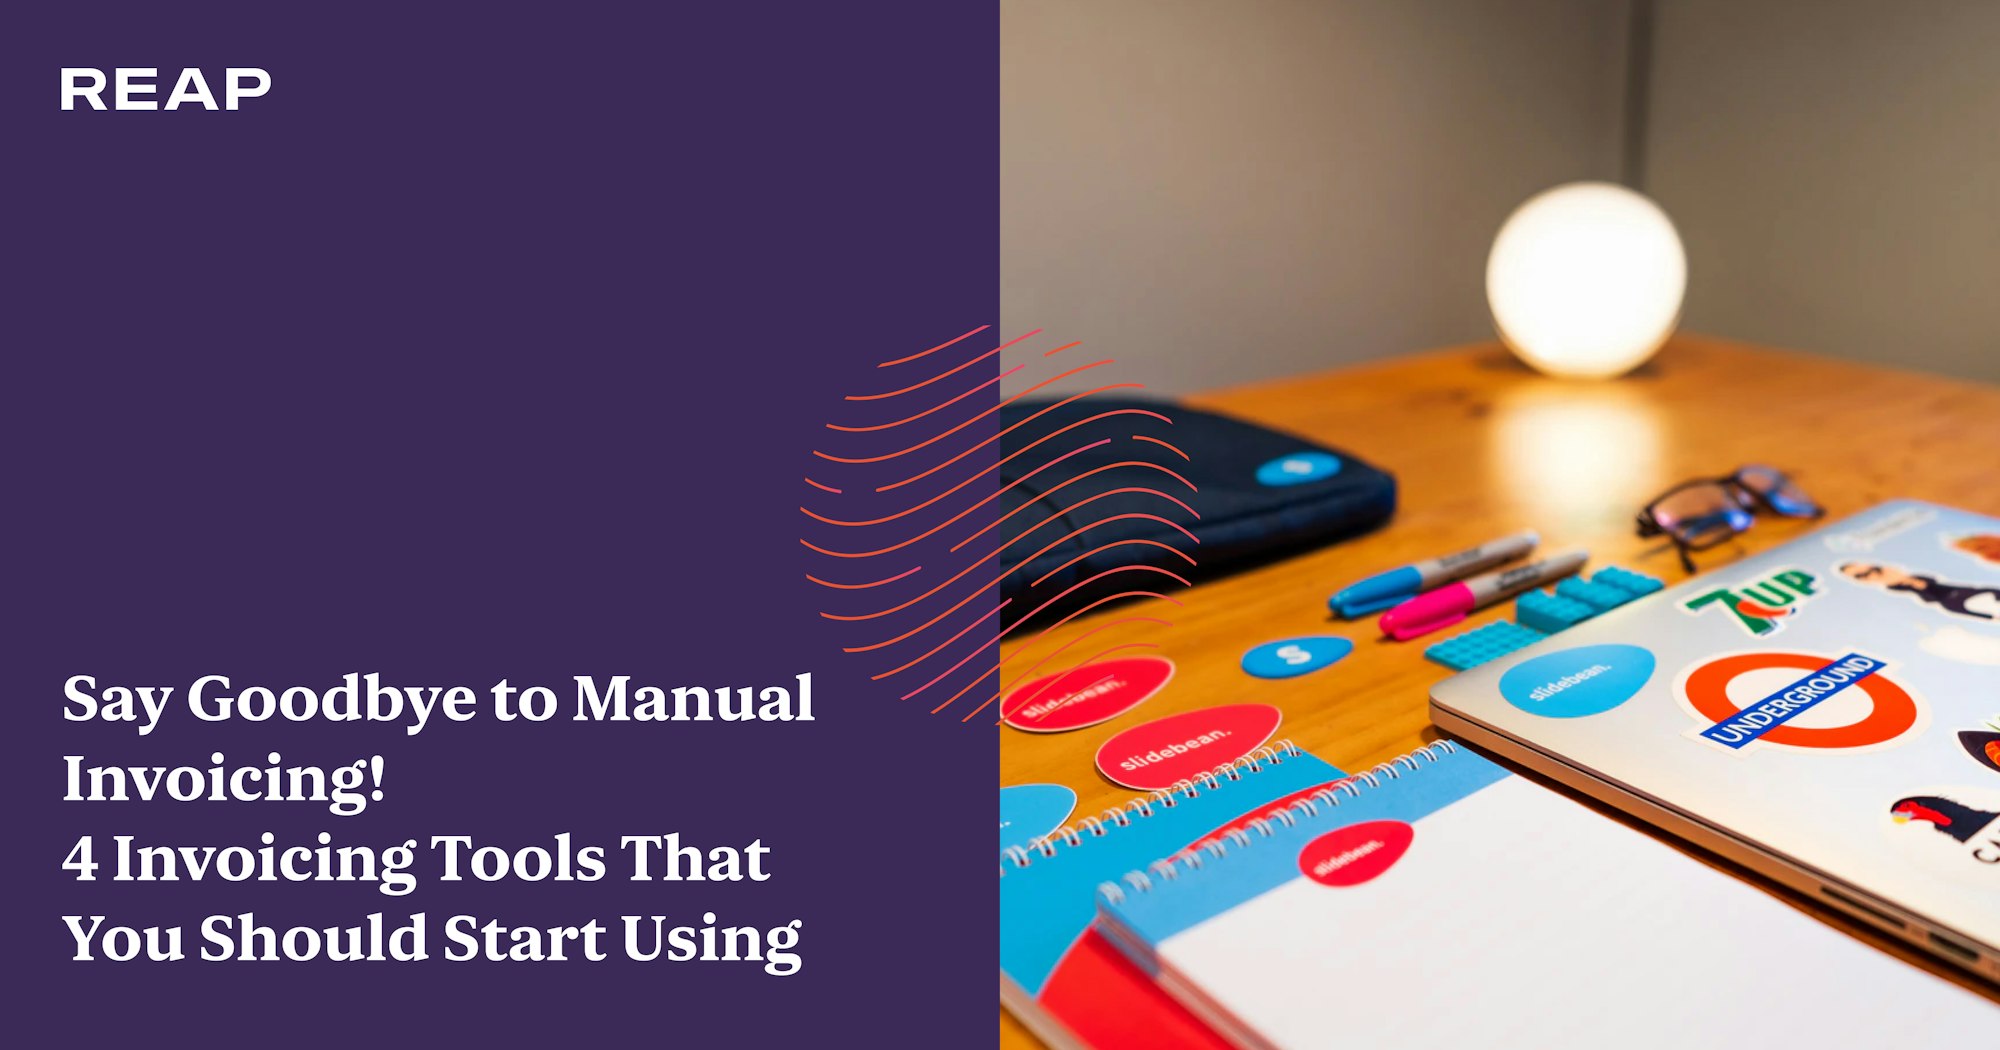 Cover Image for Say Goodbye to Manual Invoicing! 4 Invoicing Tools That You Should Start Using